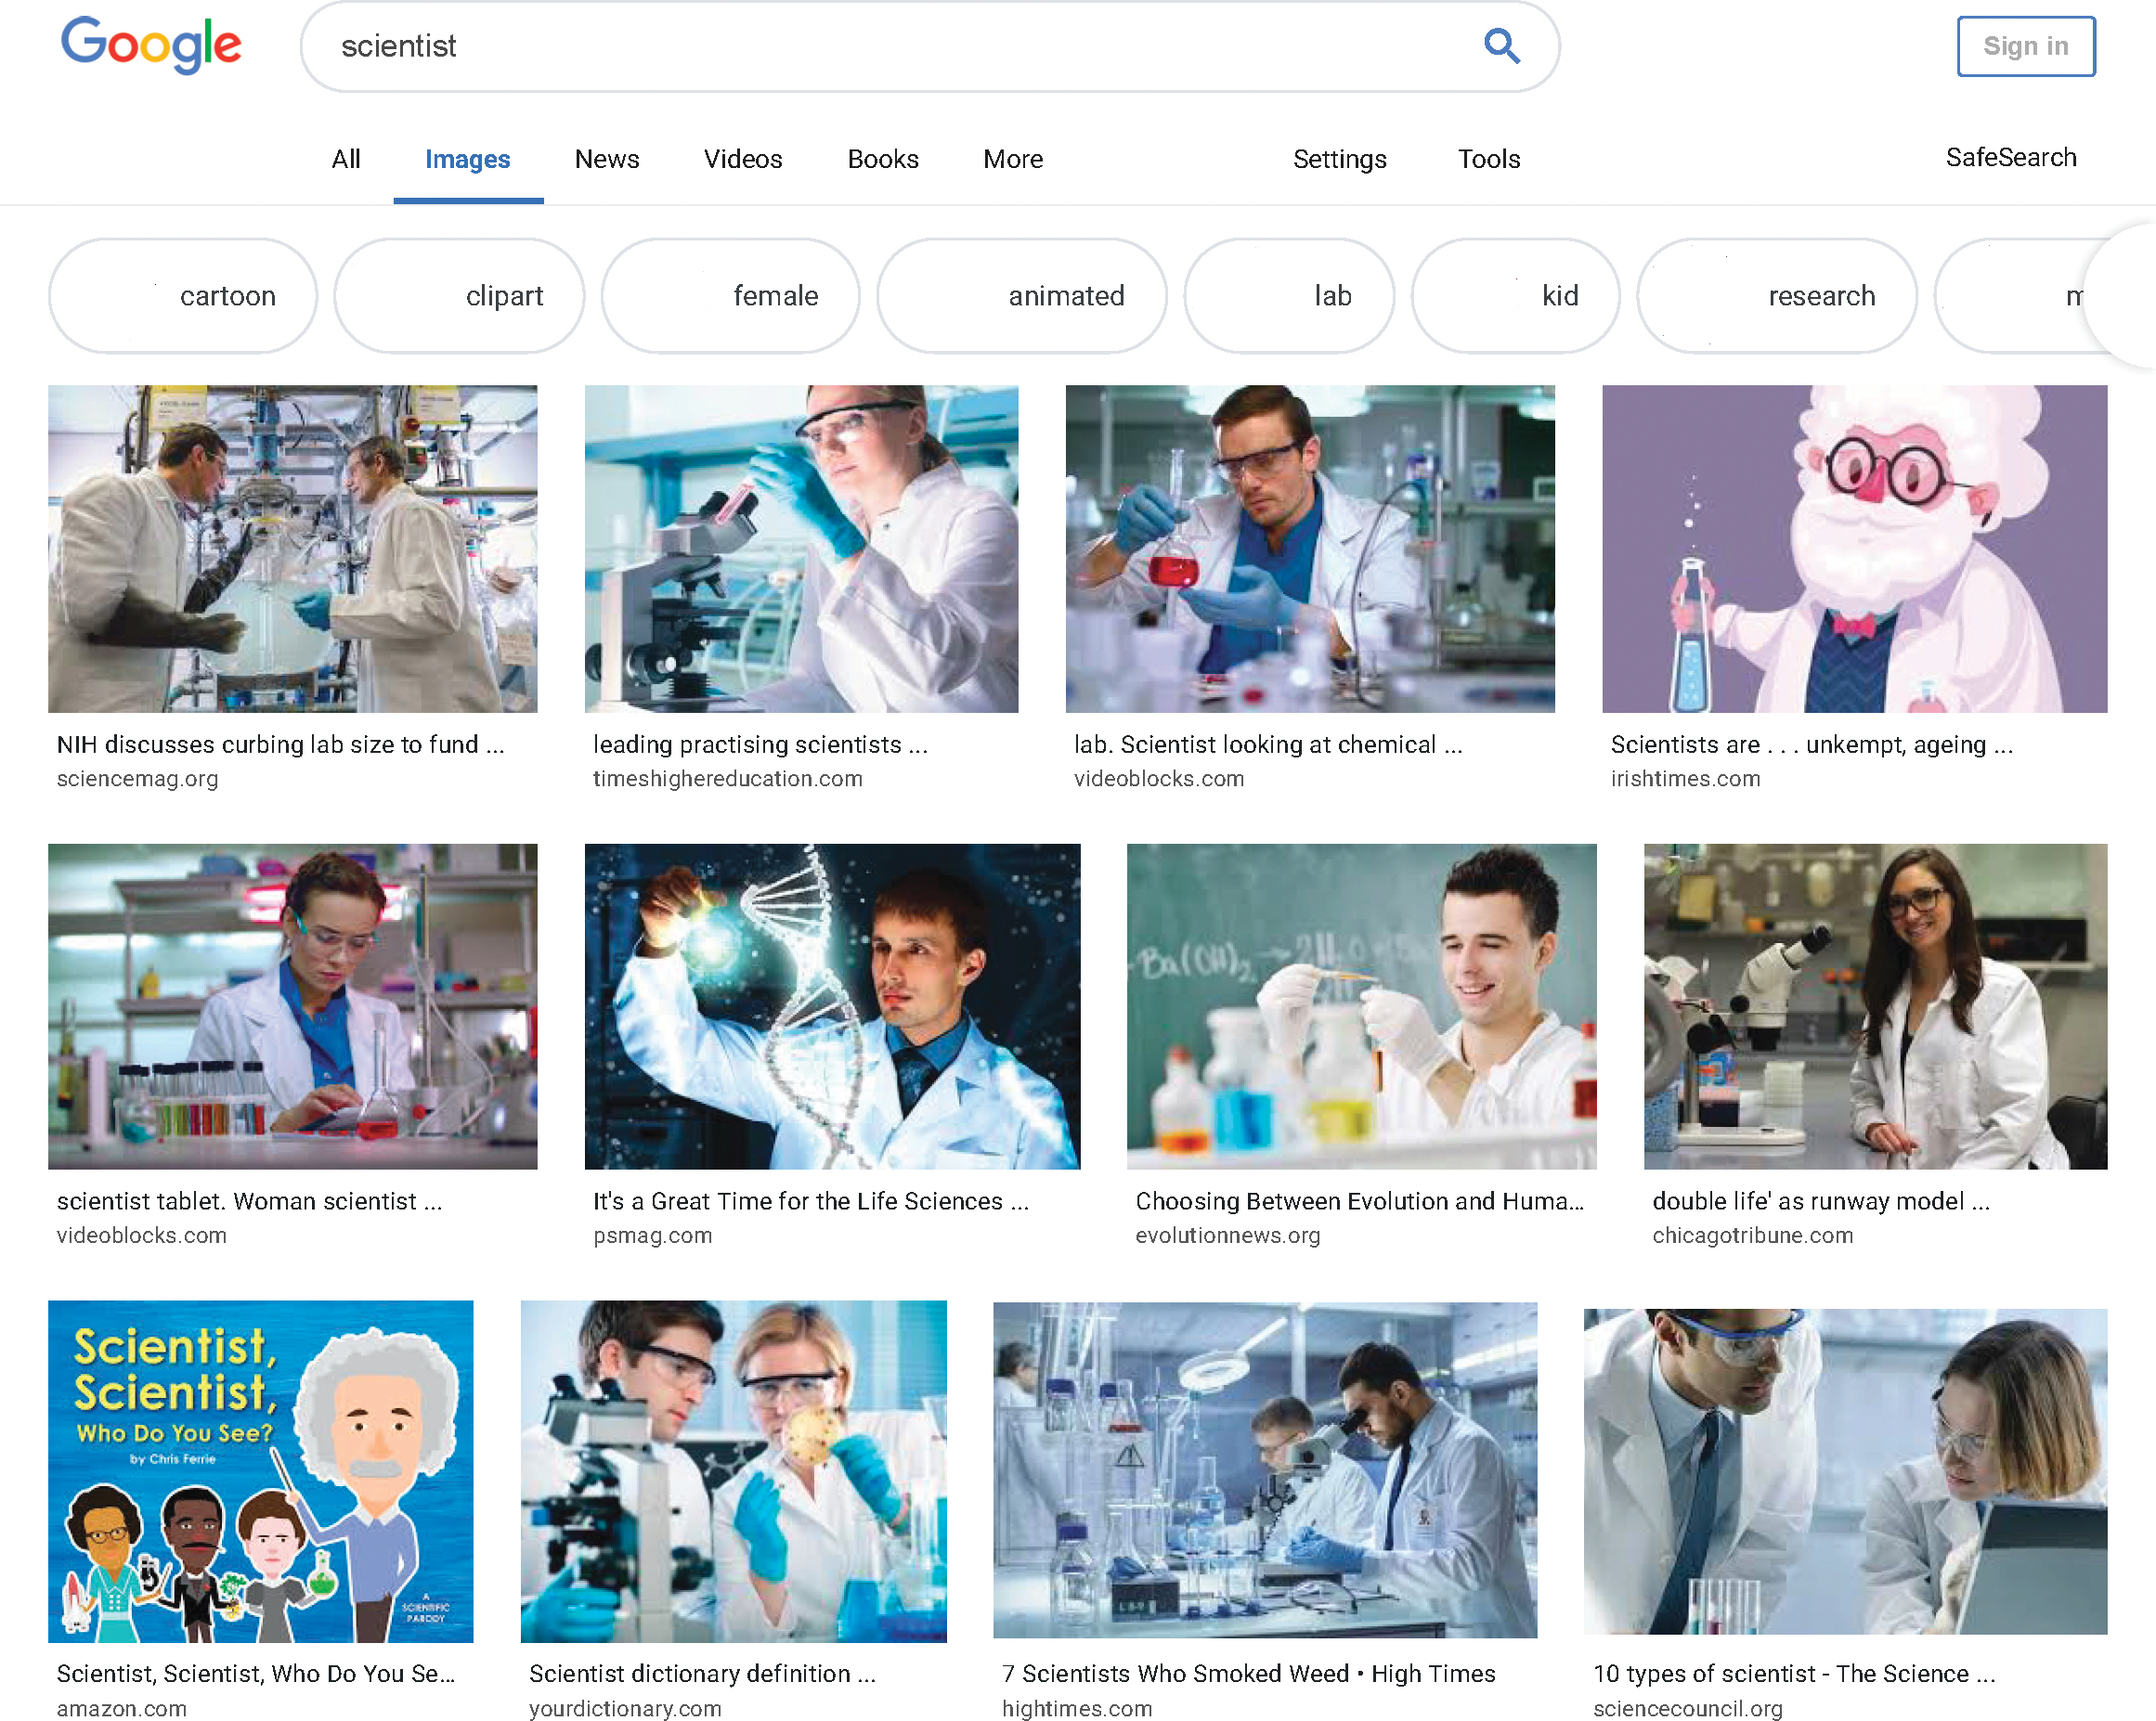 Google image search for “scientist” (screenshot from May 31, 2019)